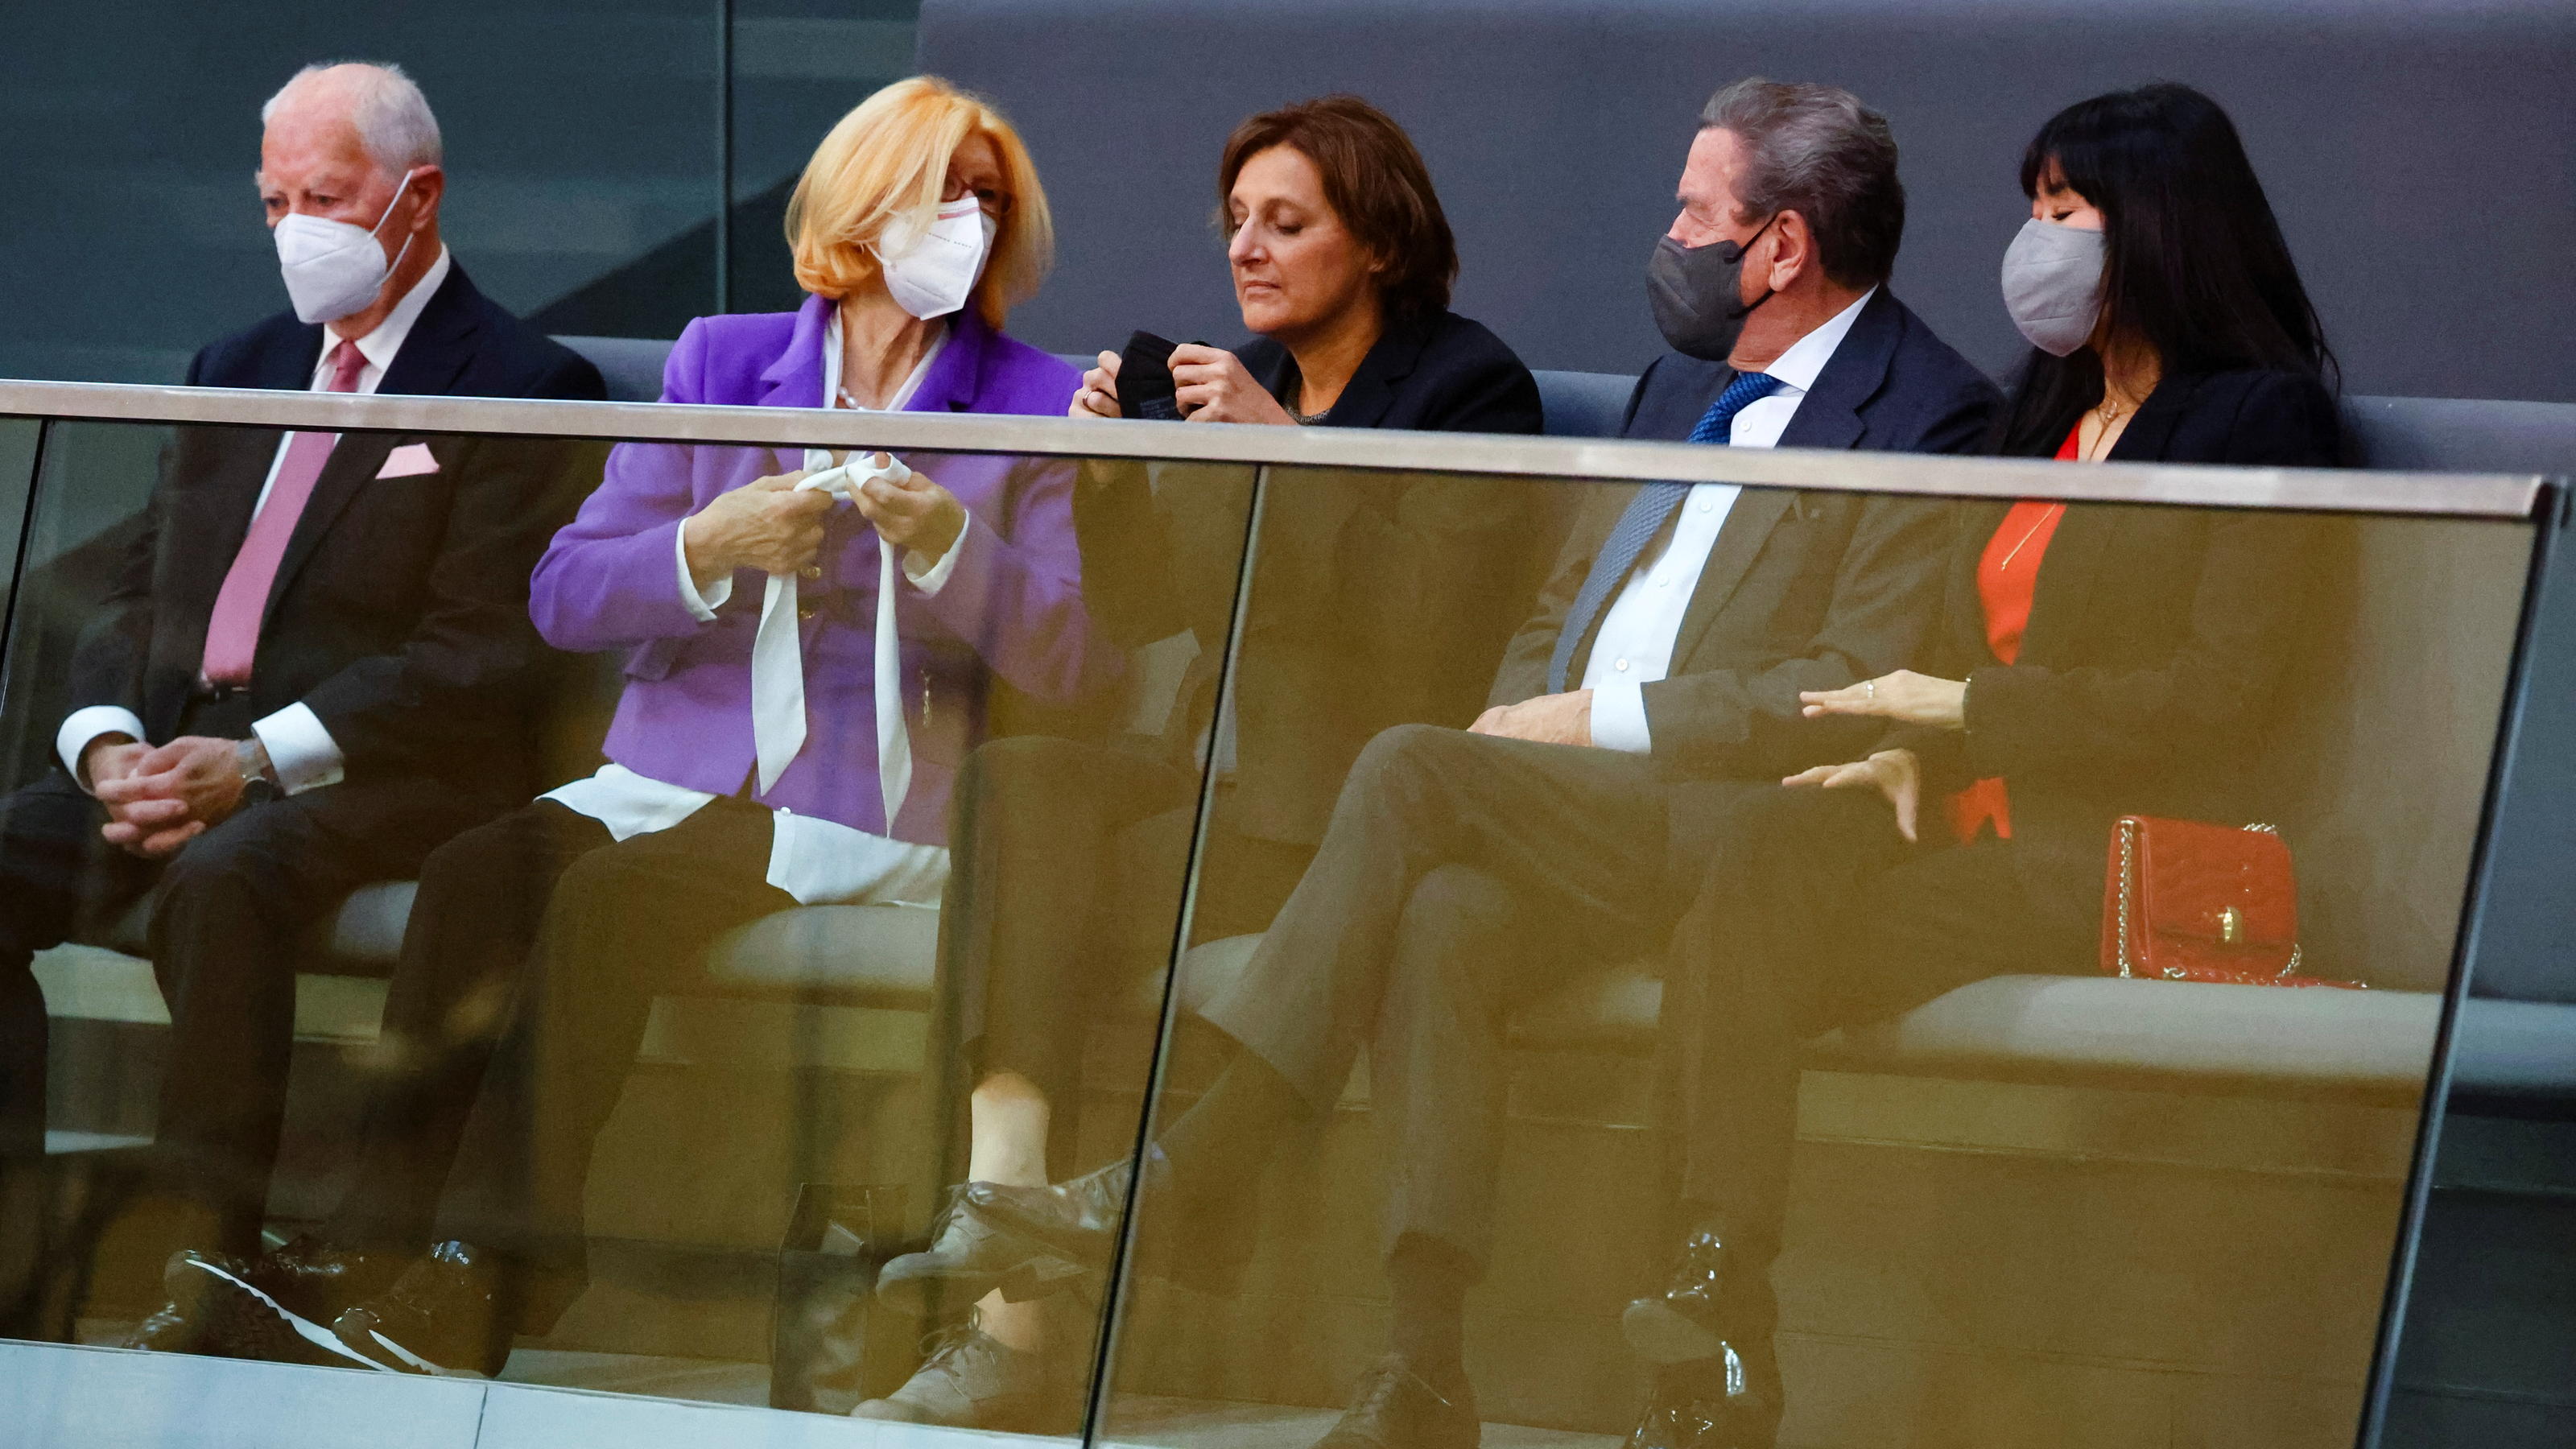 Britta Ernst, wife of designated German Chancellor Olaf Scholz, sits next to former German chancellor Gerhard Schroeder and his wife Kim So-yeon in the visitors tribune before the start of a session of the German lower house of parliament Bundestag t